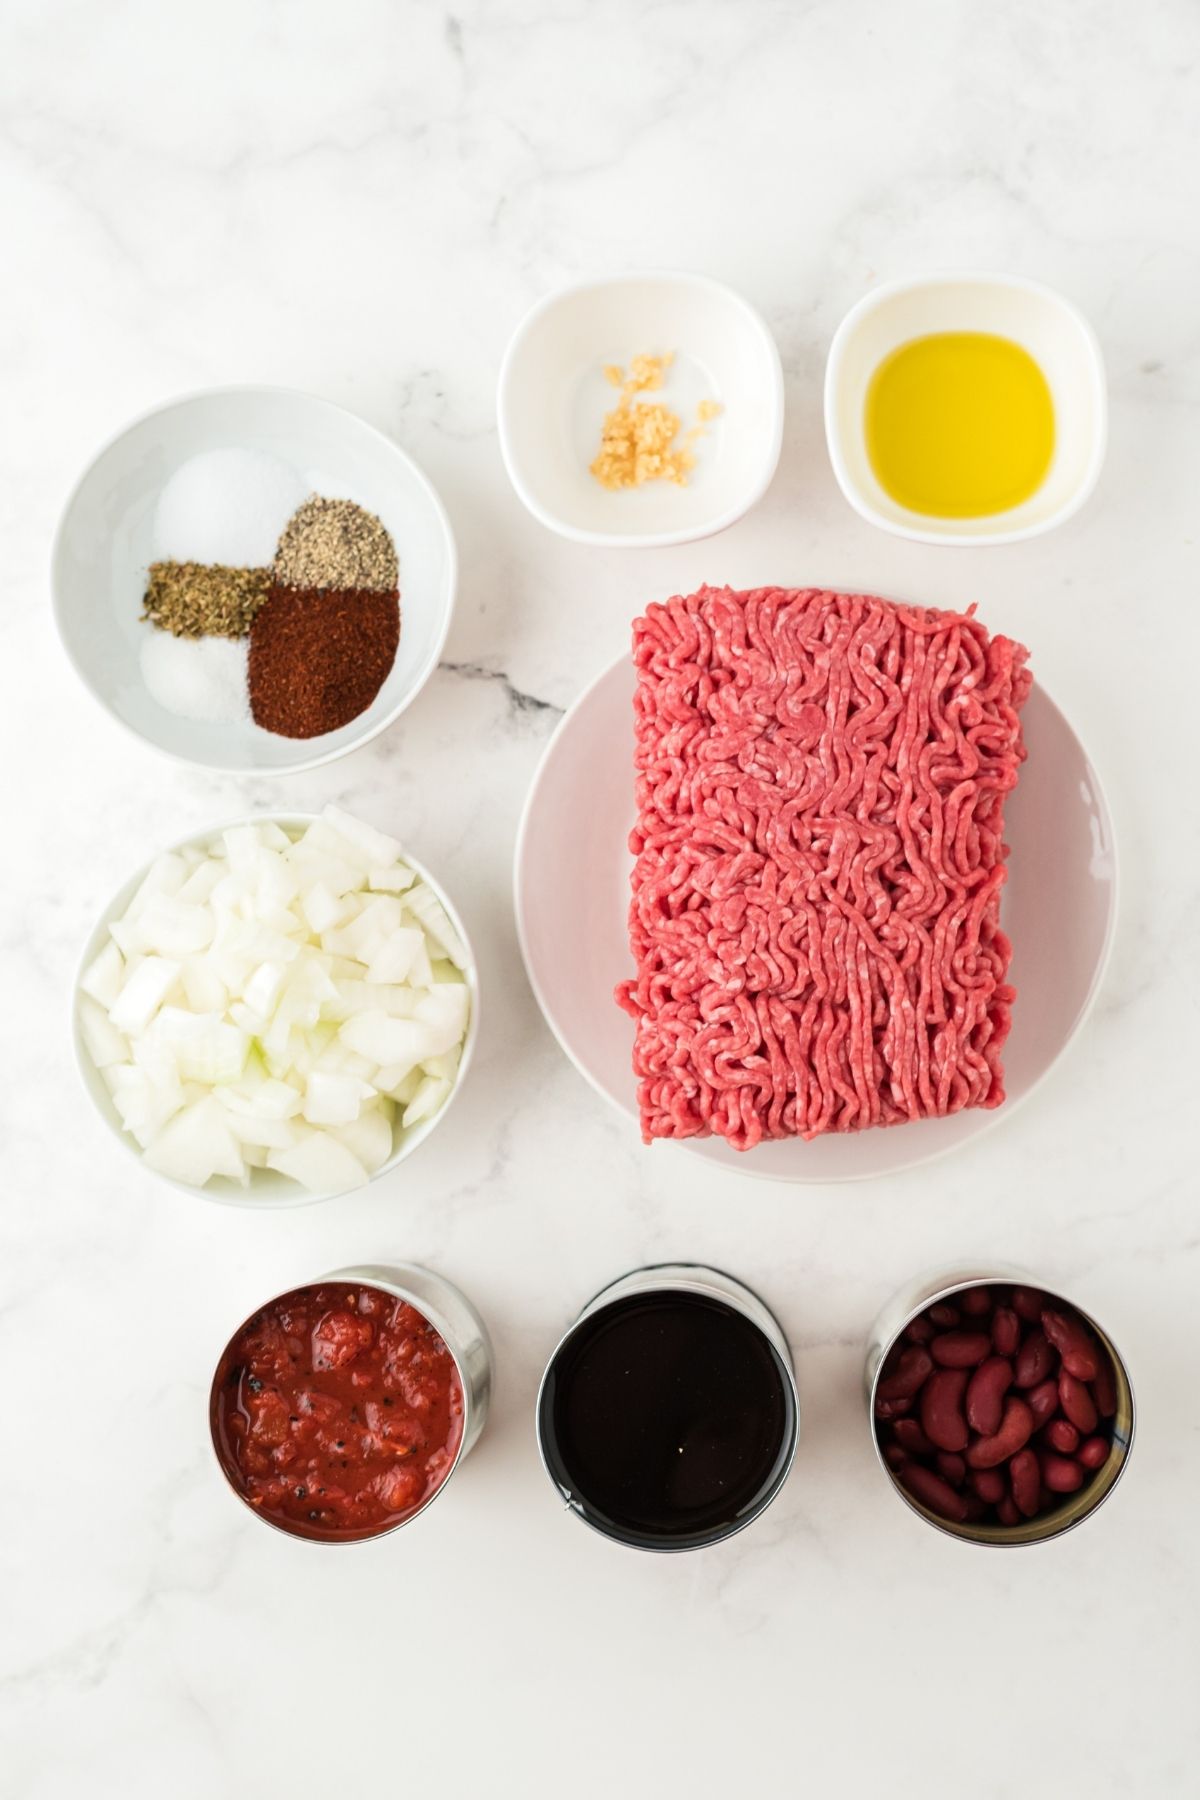 ingredients on counter: ground beef, bowl with seasonings, chopped onion, olive oil, red kidney beans, crushed tomatoes in can, broth, Worcestershire sauce, sugar